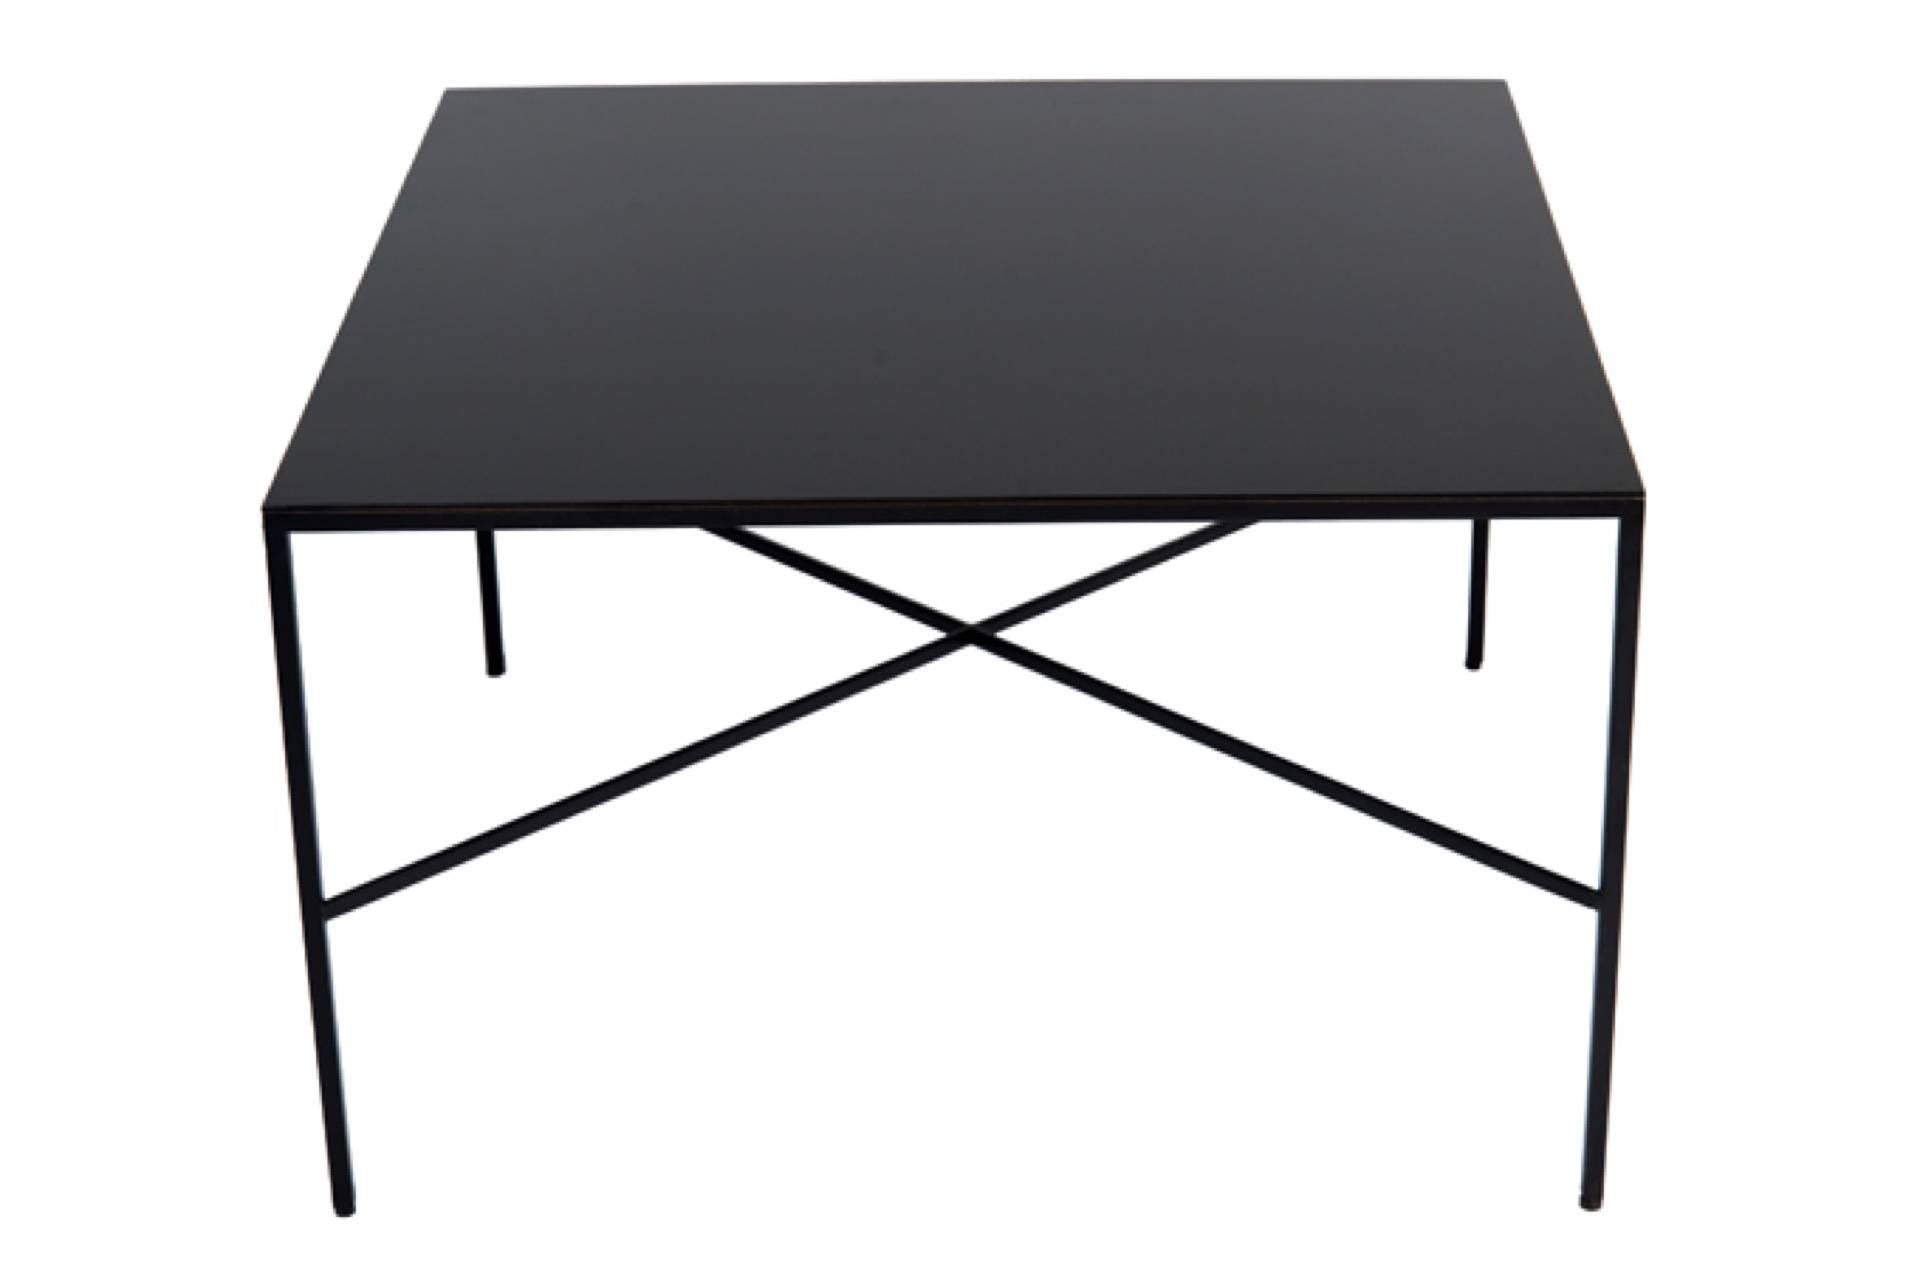 Steel frame X-stretcher table shown in a black oxide satin finish with blackened steel plate top.

Custom orders have a lead time of 10-12 weeks FOB NYC. Lead time contingent upon selection of finishes, approval of shop drawings (if applicable),